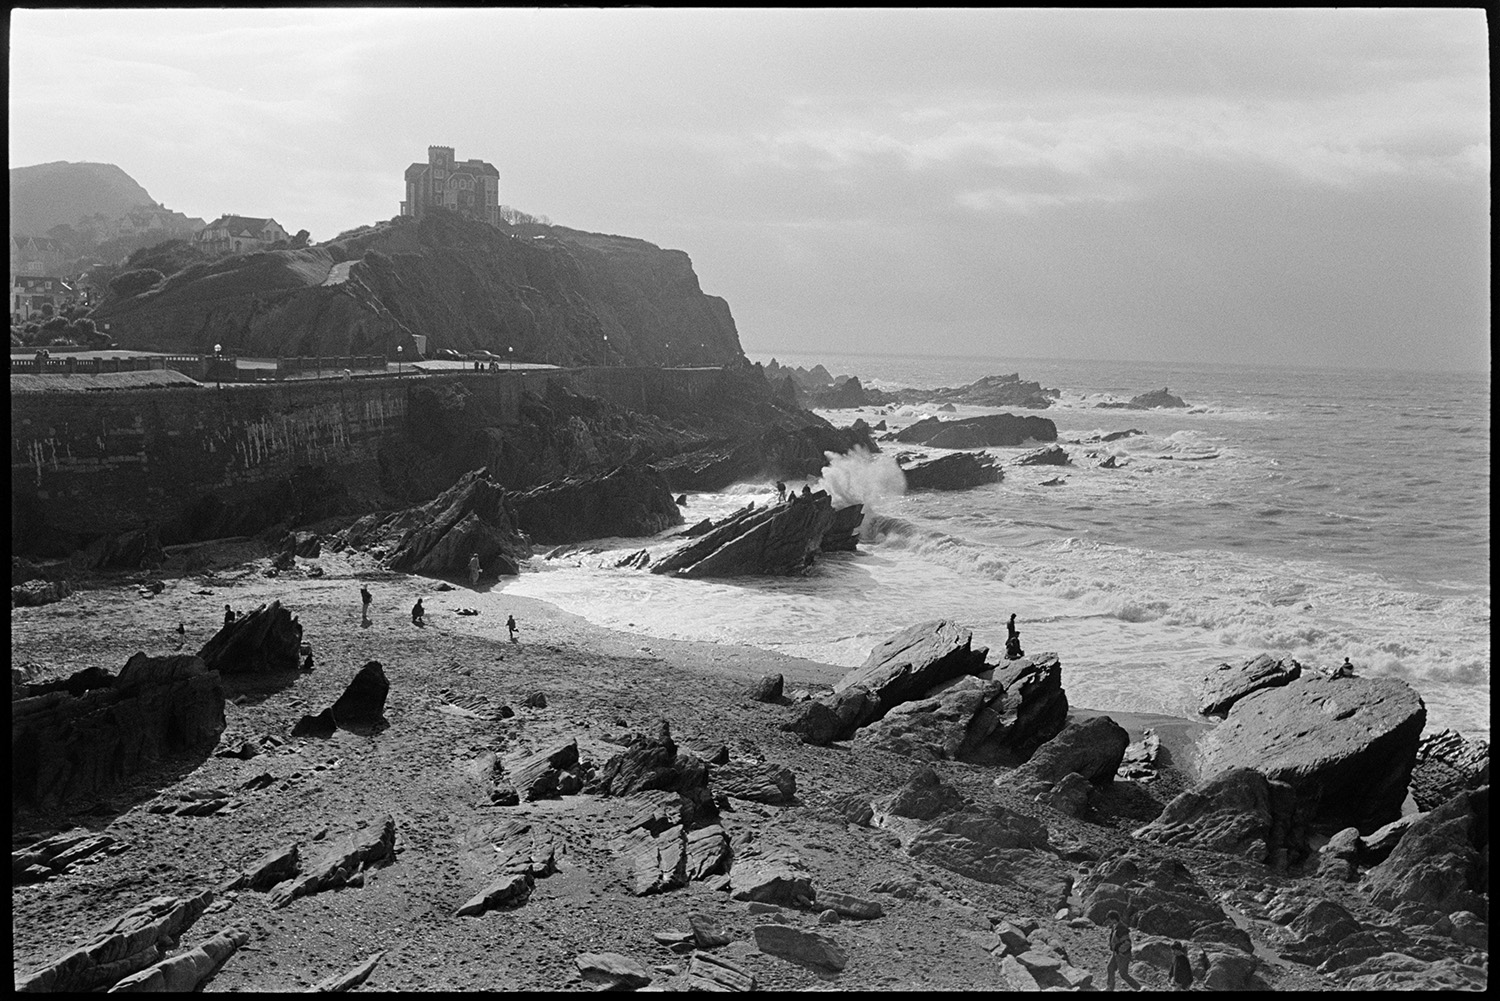 People walking on rocky beach with stormy sea and sky, clouds. 
[People walking between rocks on the beach at Ilfracombe. Waves are crashing over the rocks and a building is visible on the clifftop in the background, against a  cloudy sky.]